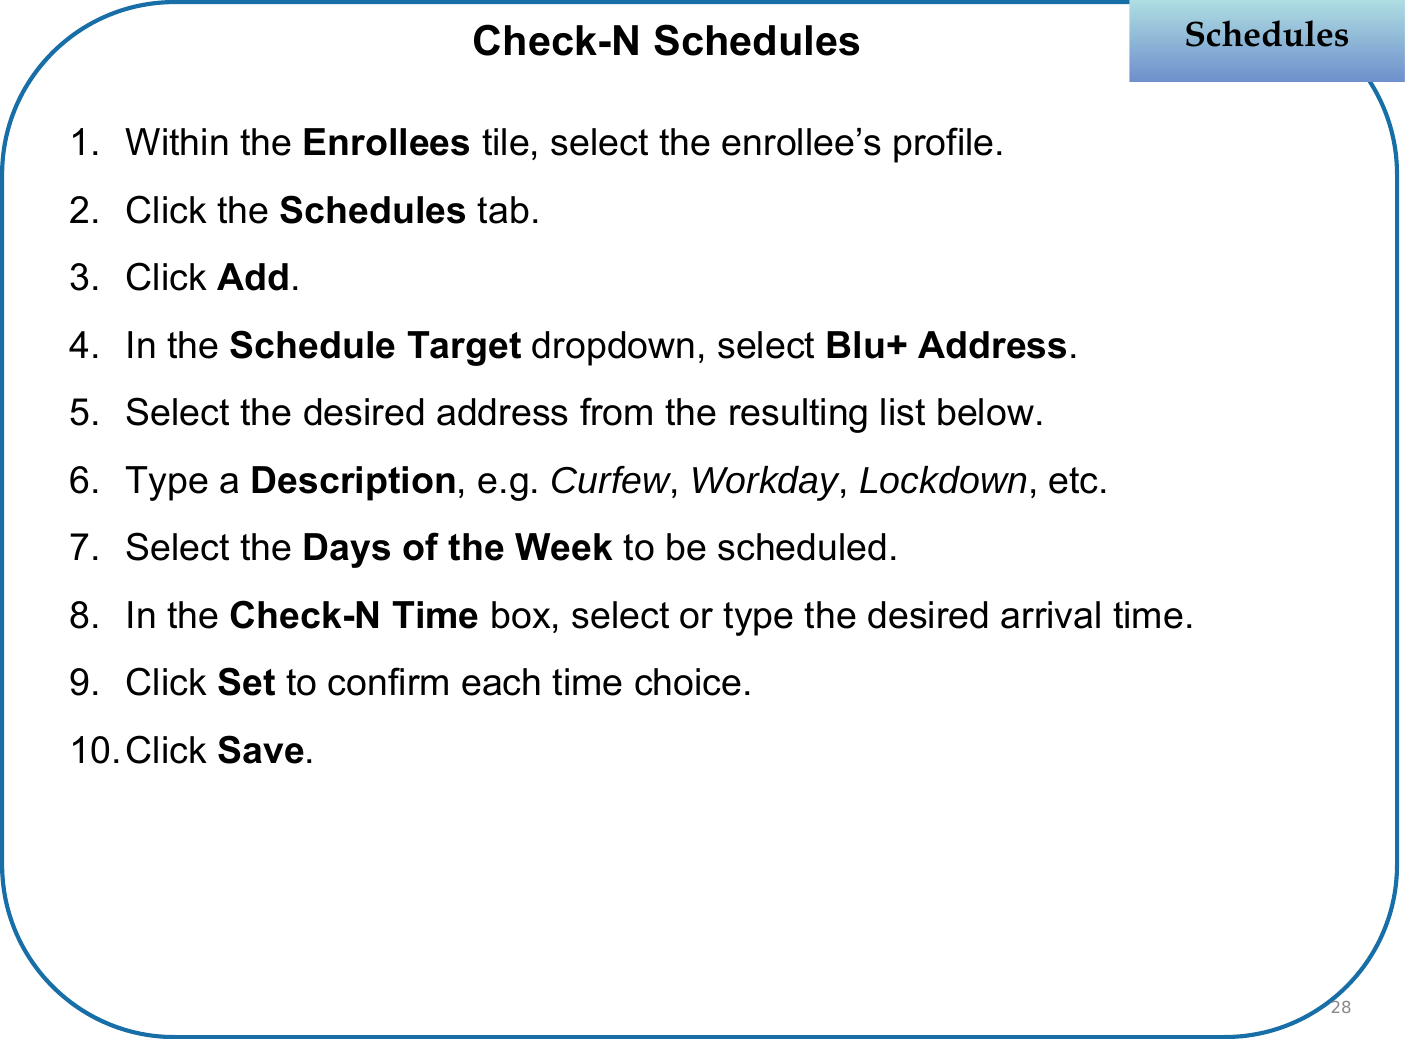 1. Within the Enrollees tile, select the enrollee’s profile.2. Click the Schedules tab.3. Click Add.4. In the Schedule Target dropdown, select Blu+ Address.5. Select the desired address from the resulting list below.6. Type a Description, e.g. Curfew, Workday, Lockdown, etc.7. Select the Days of the Week to be scheduled.8. In the Check-N Time box, select or type the desired arrival time.9. Click Set to confirm each time choice.10.Click Save.SchedulesSchedulesCheck-N Schedules28